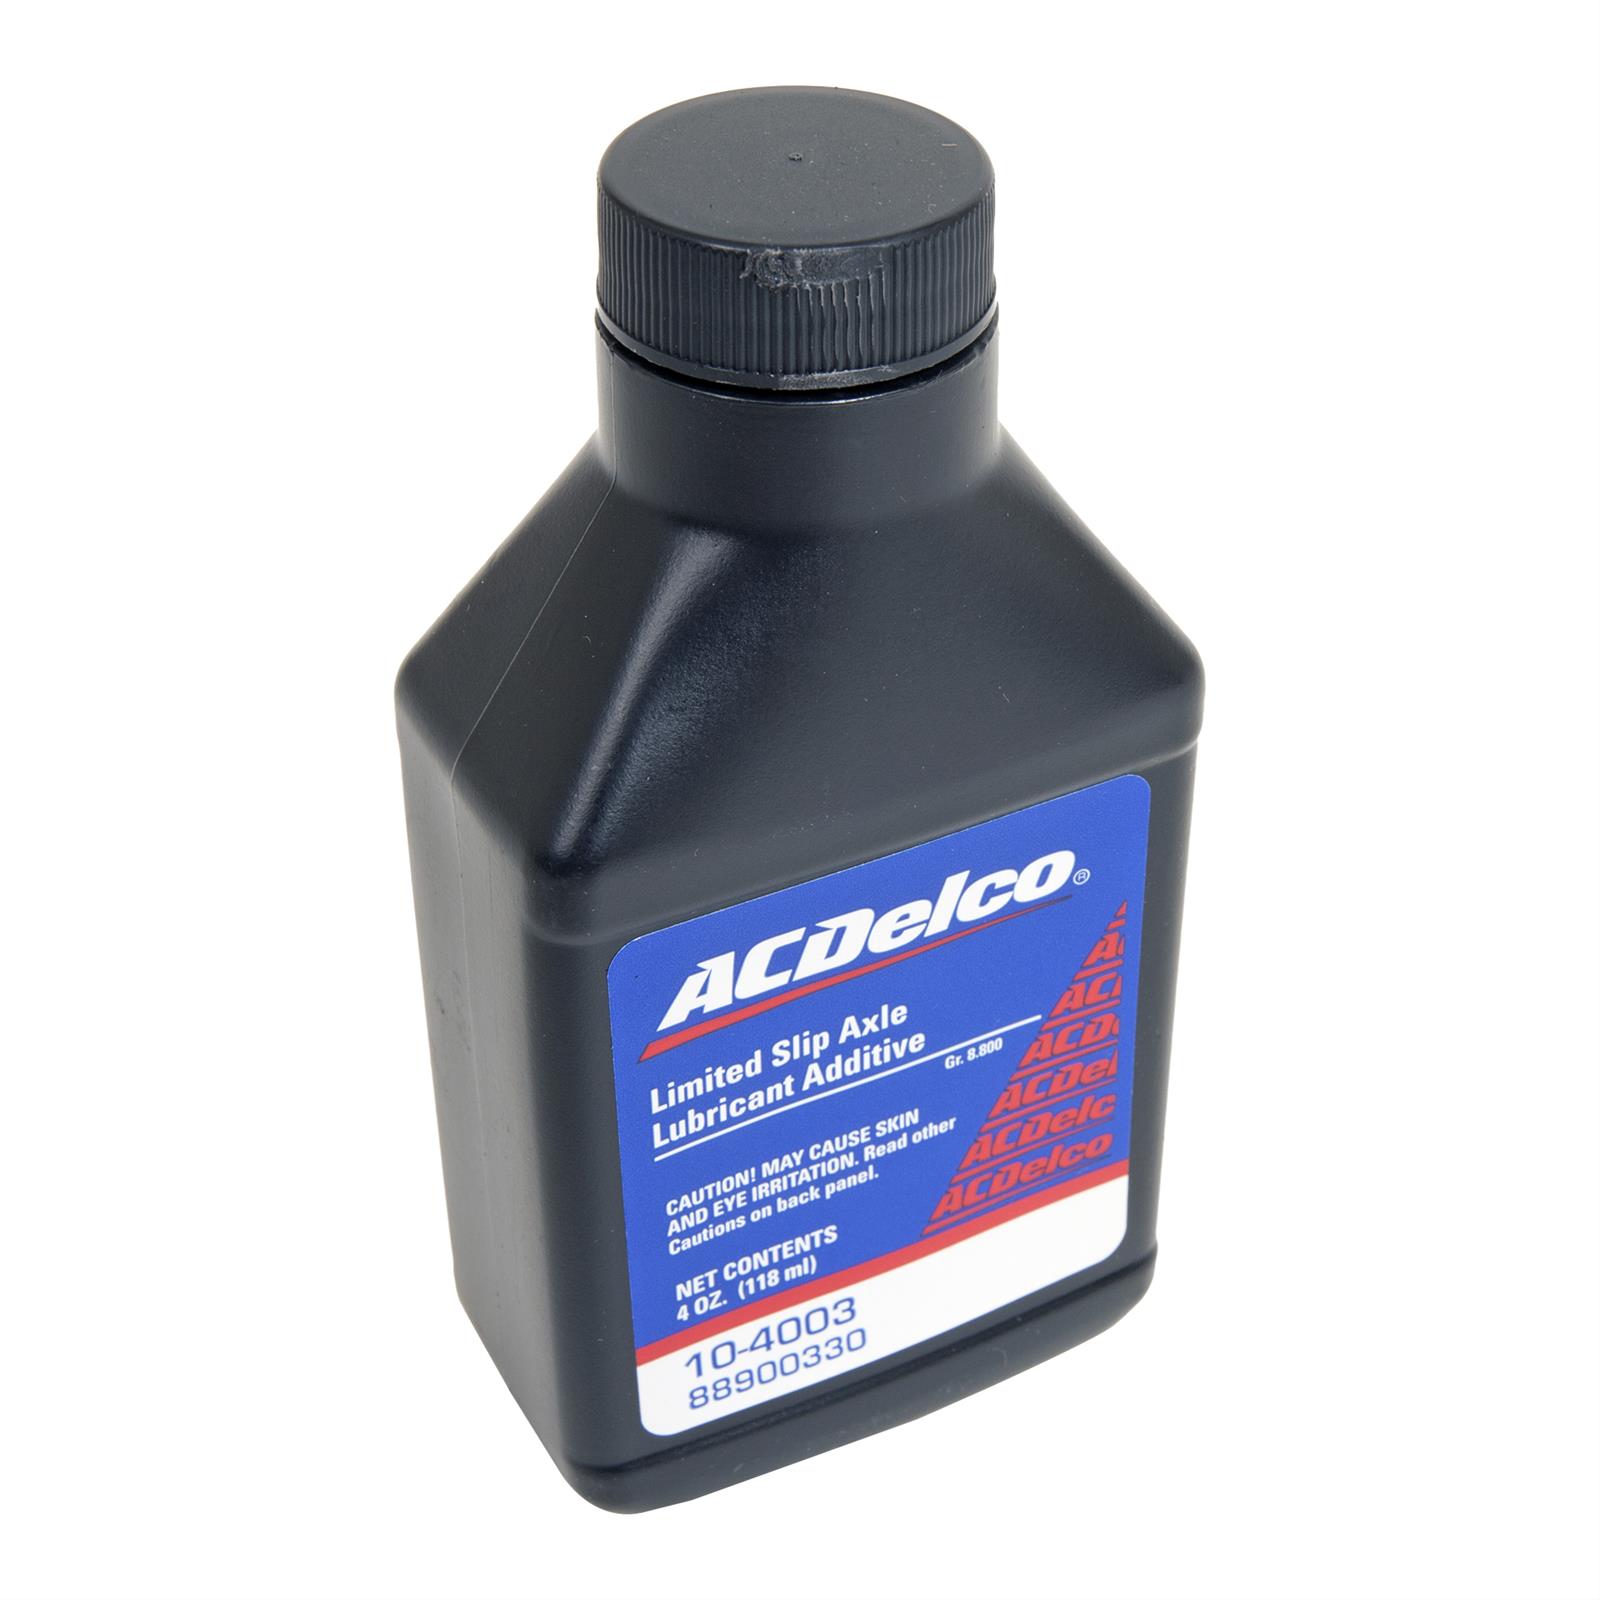 Ford limited slip differential additive #6